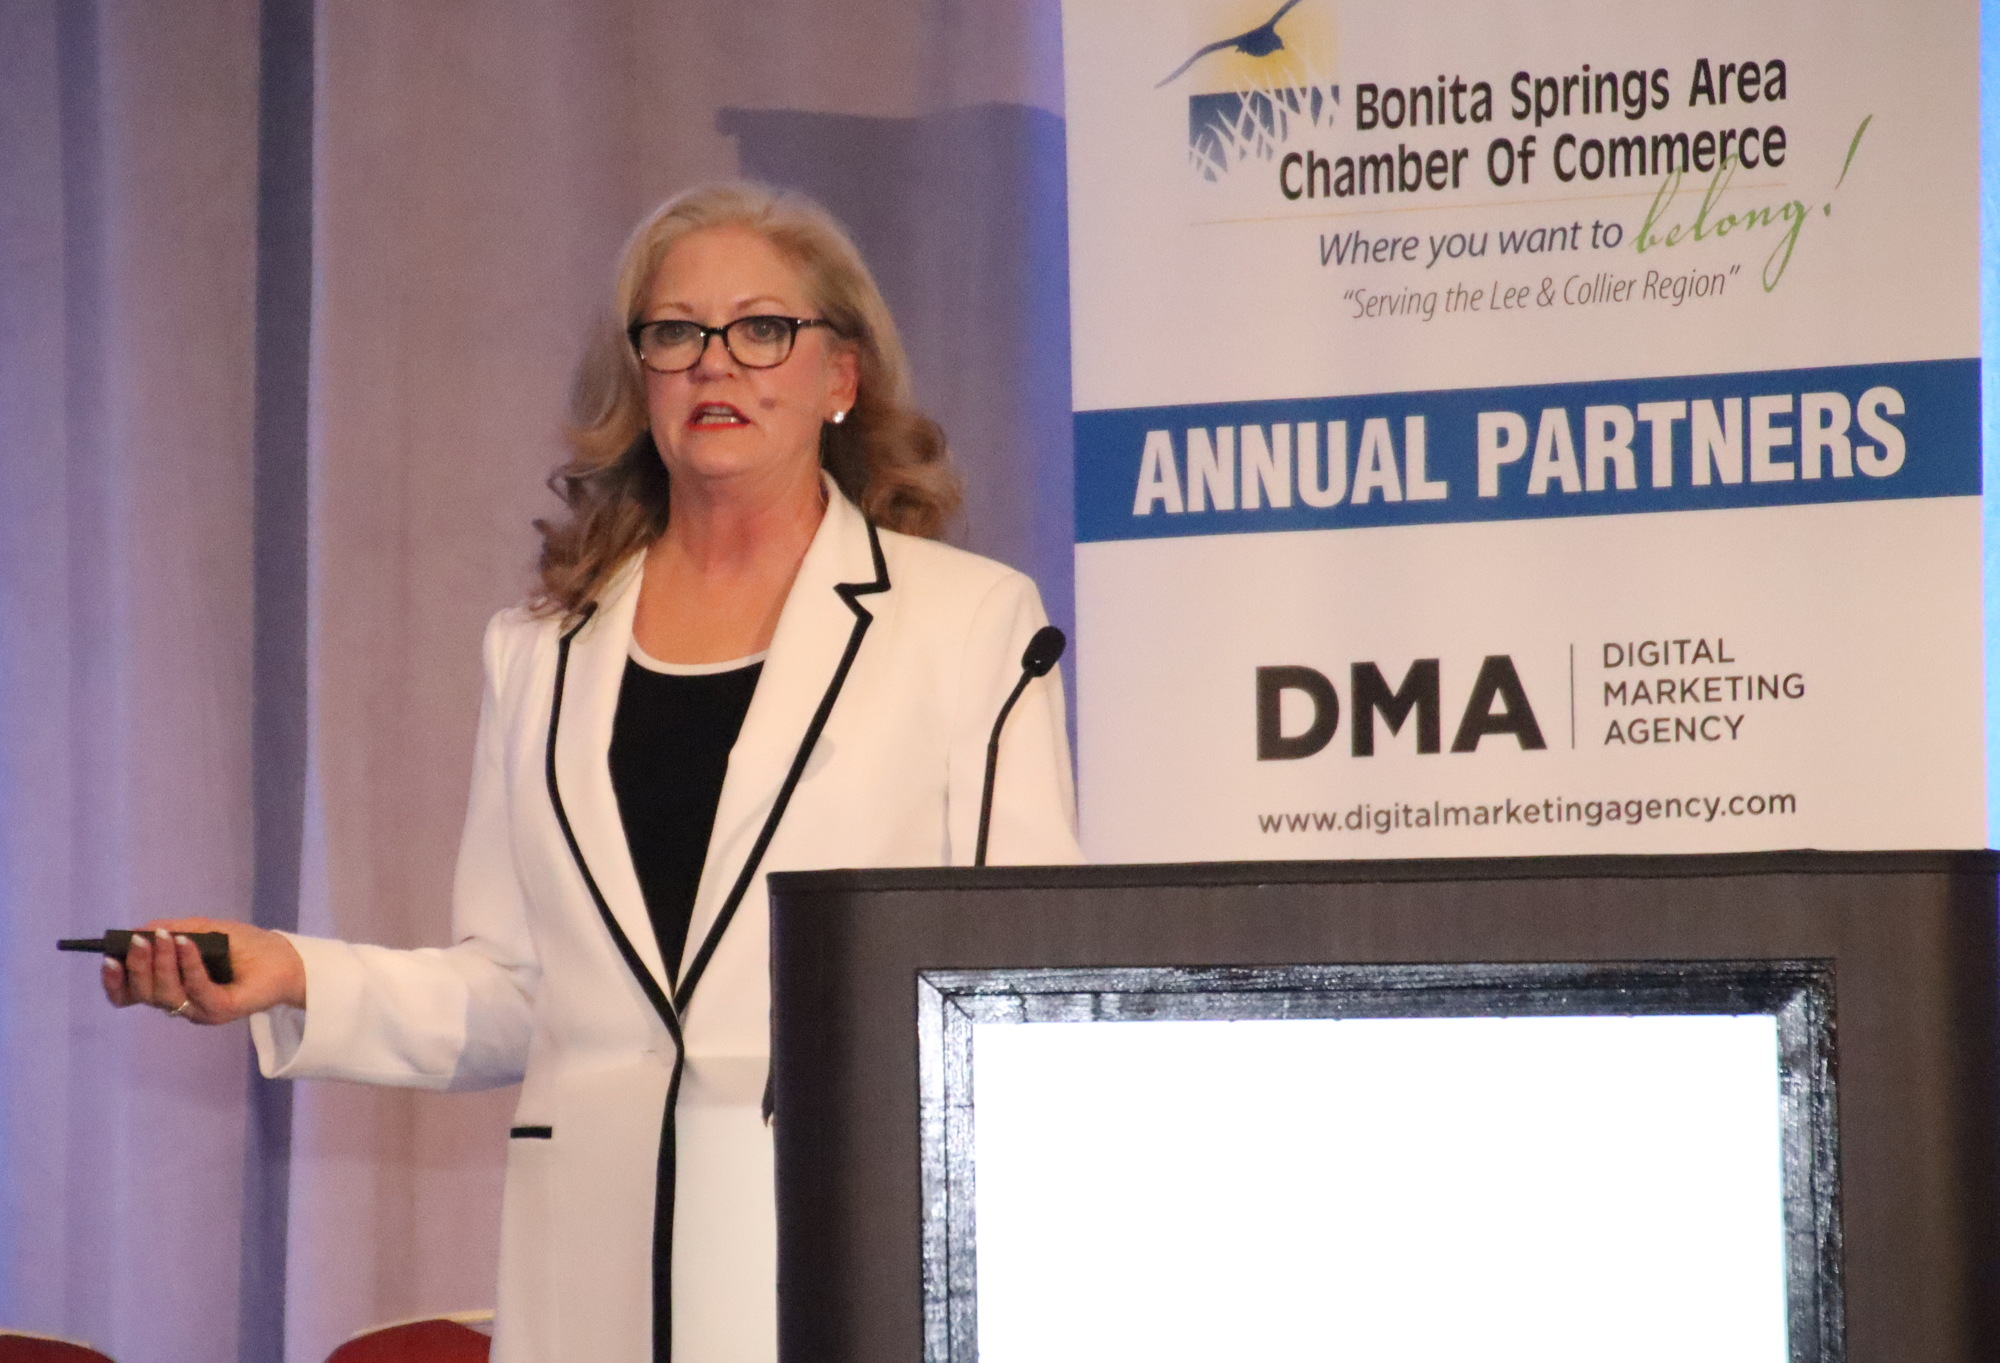 Dianne Jacob gave a presentation to a large audience at the Bonita Springs Area Chamber of Commerce's annual awards celebration at the Hyatt Coconut Point in Estero. Photo by Jim Jett.